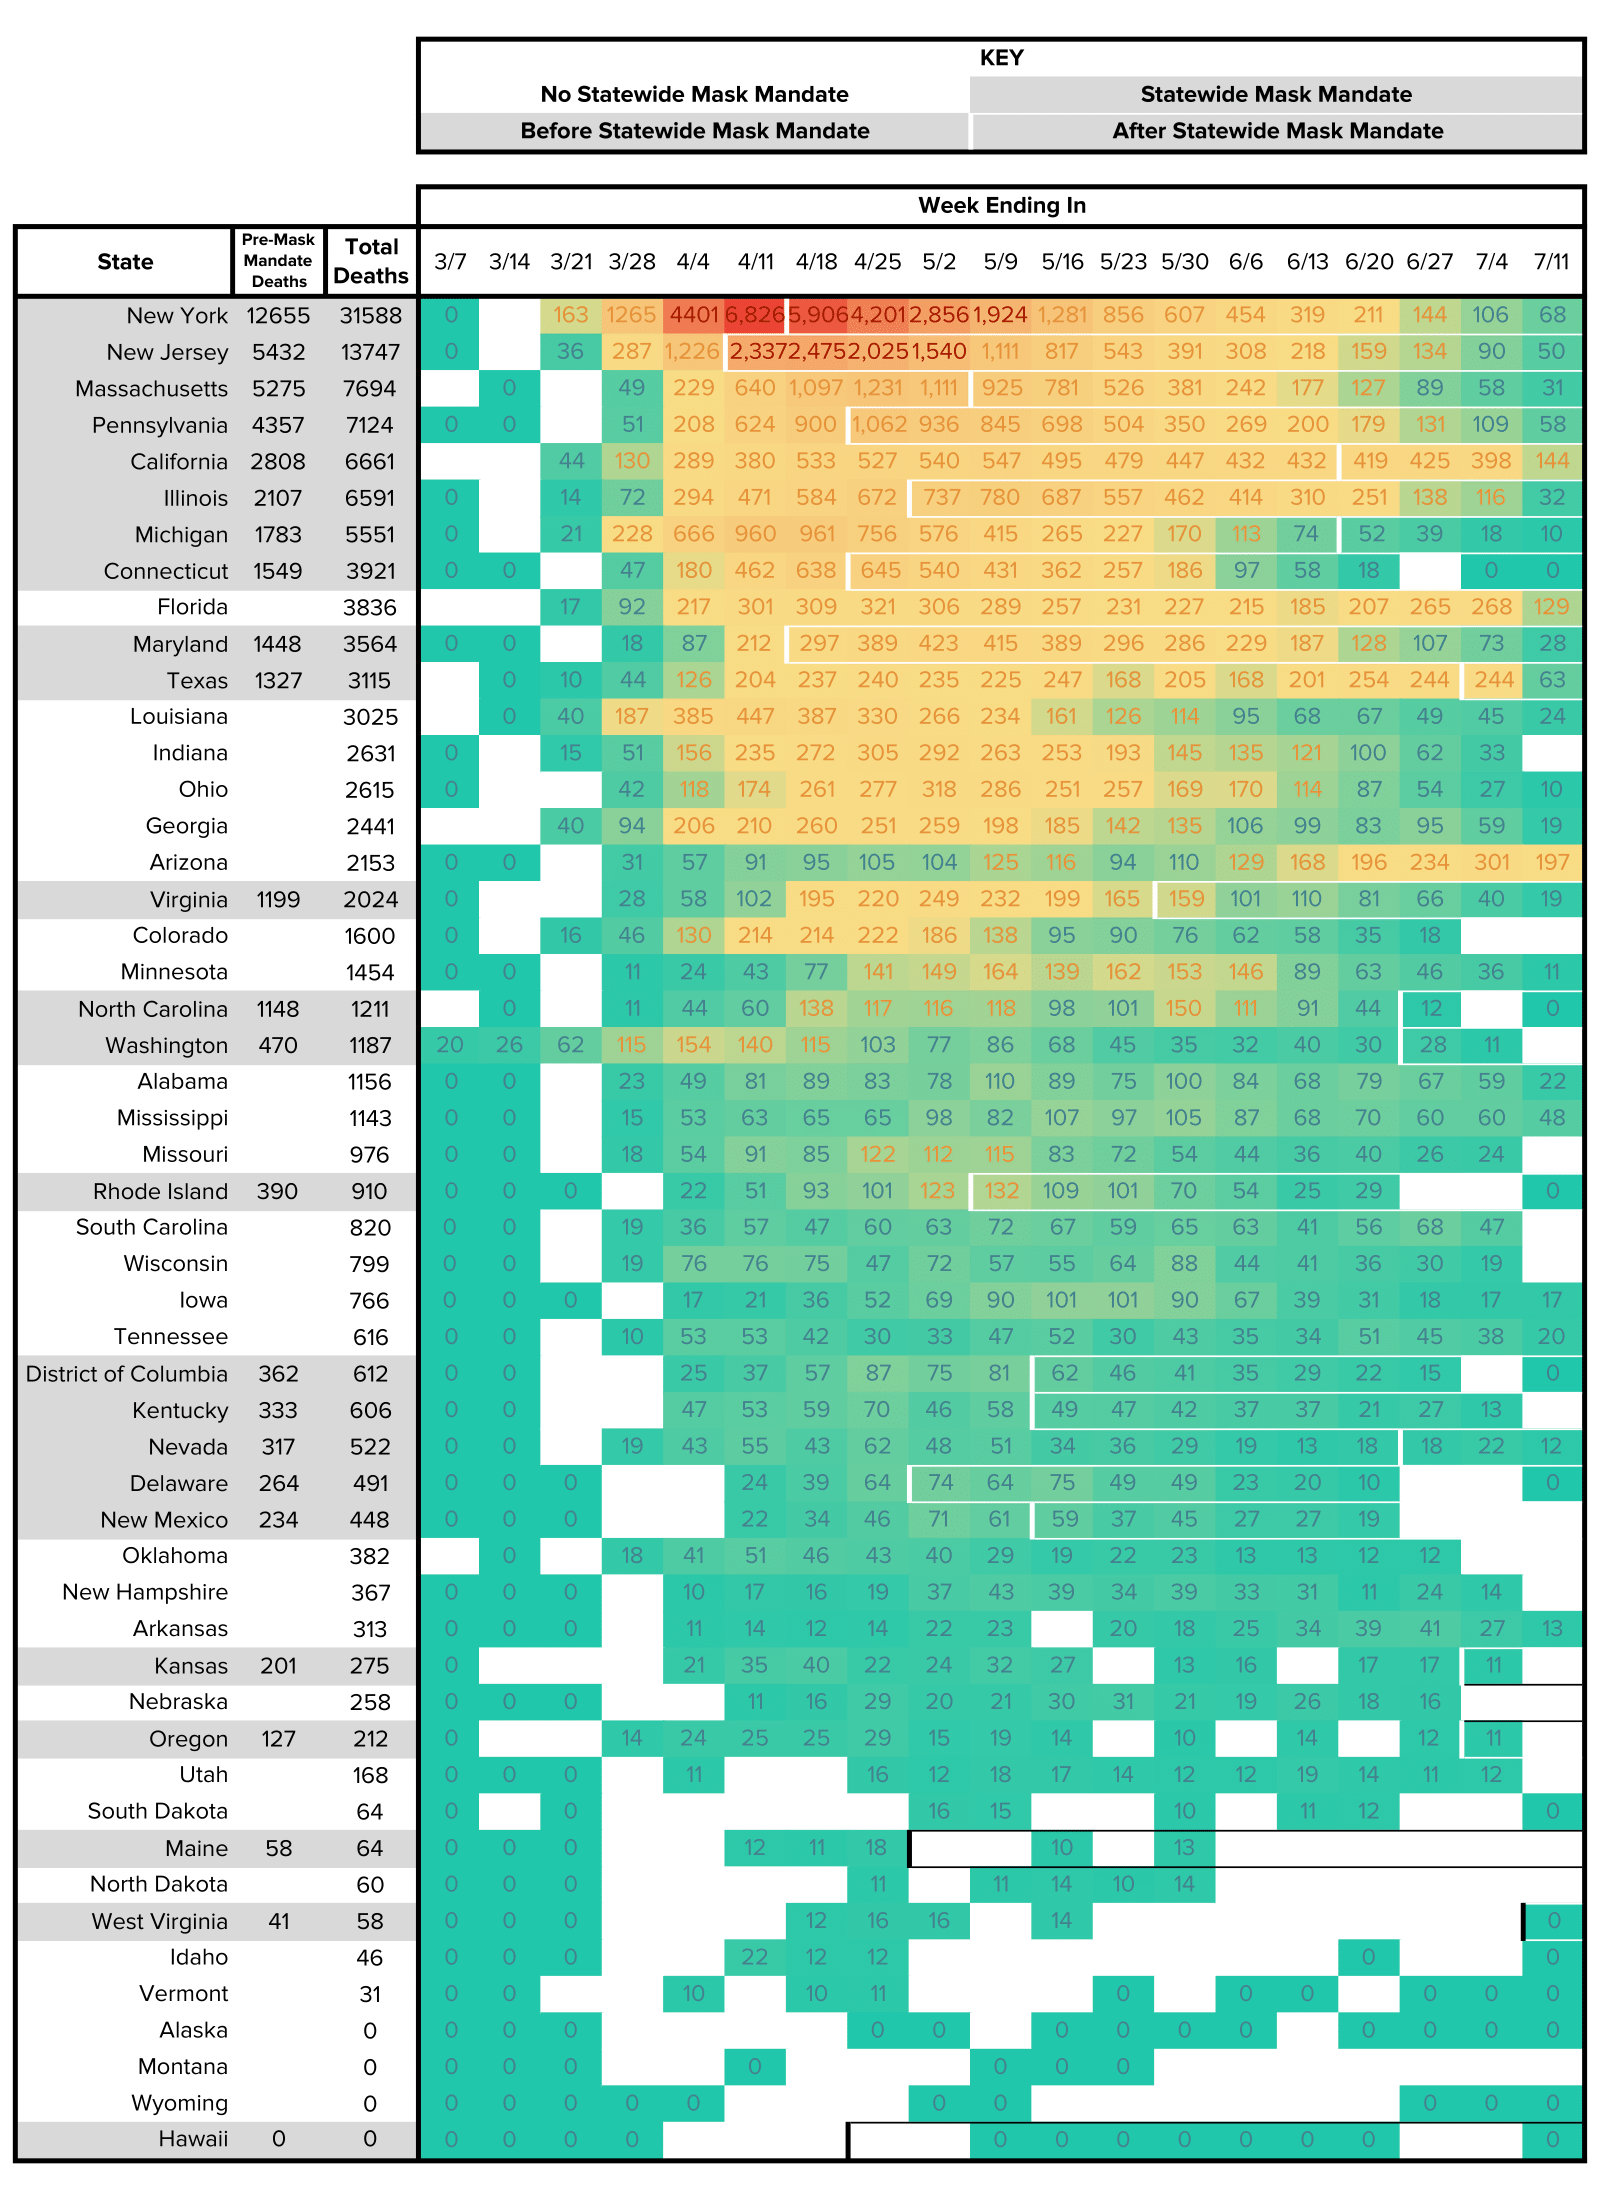 covid 19 associated death count and statewide mask mandate chart by week